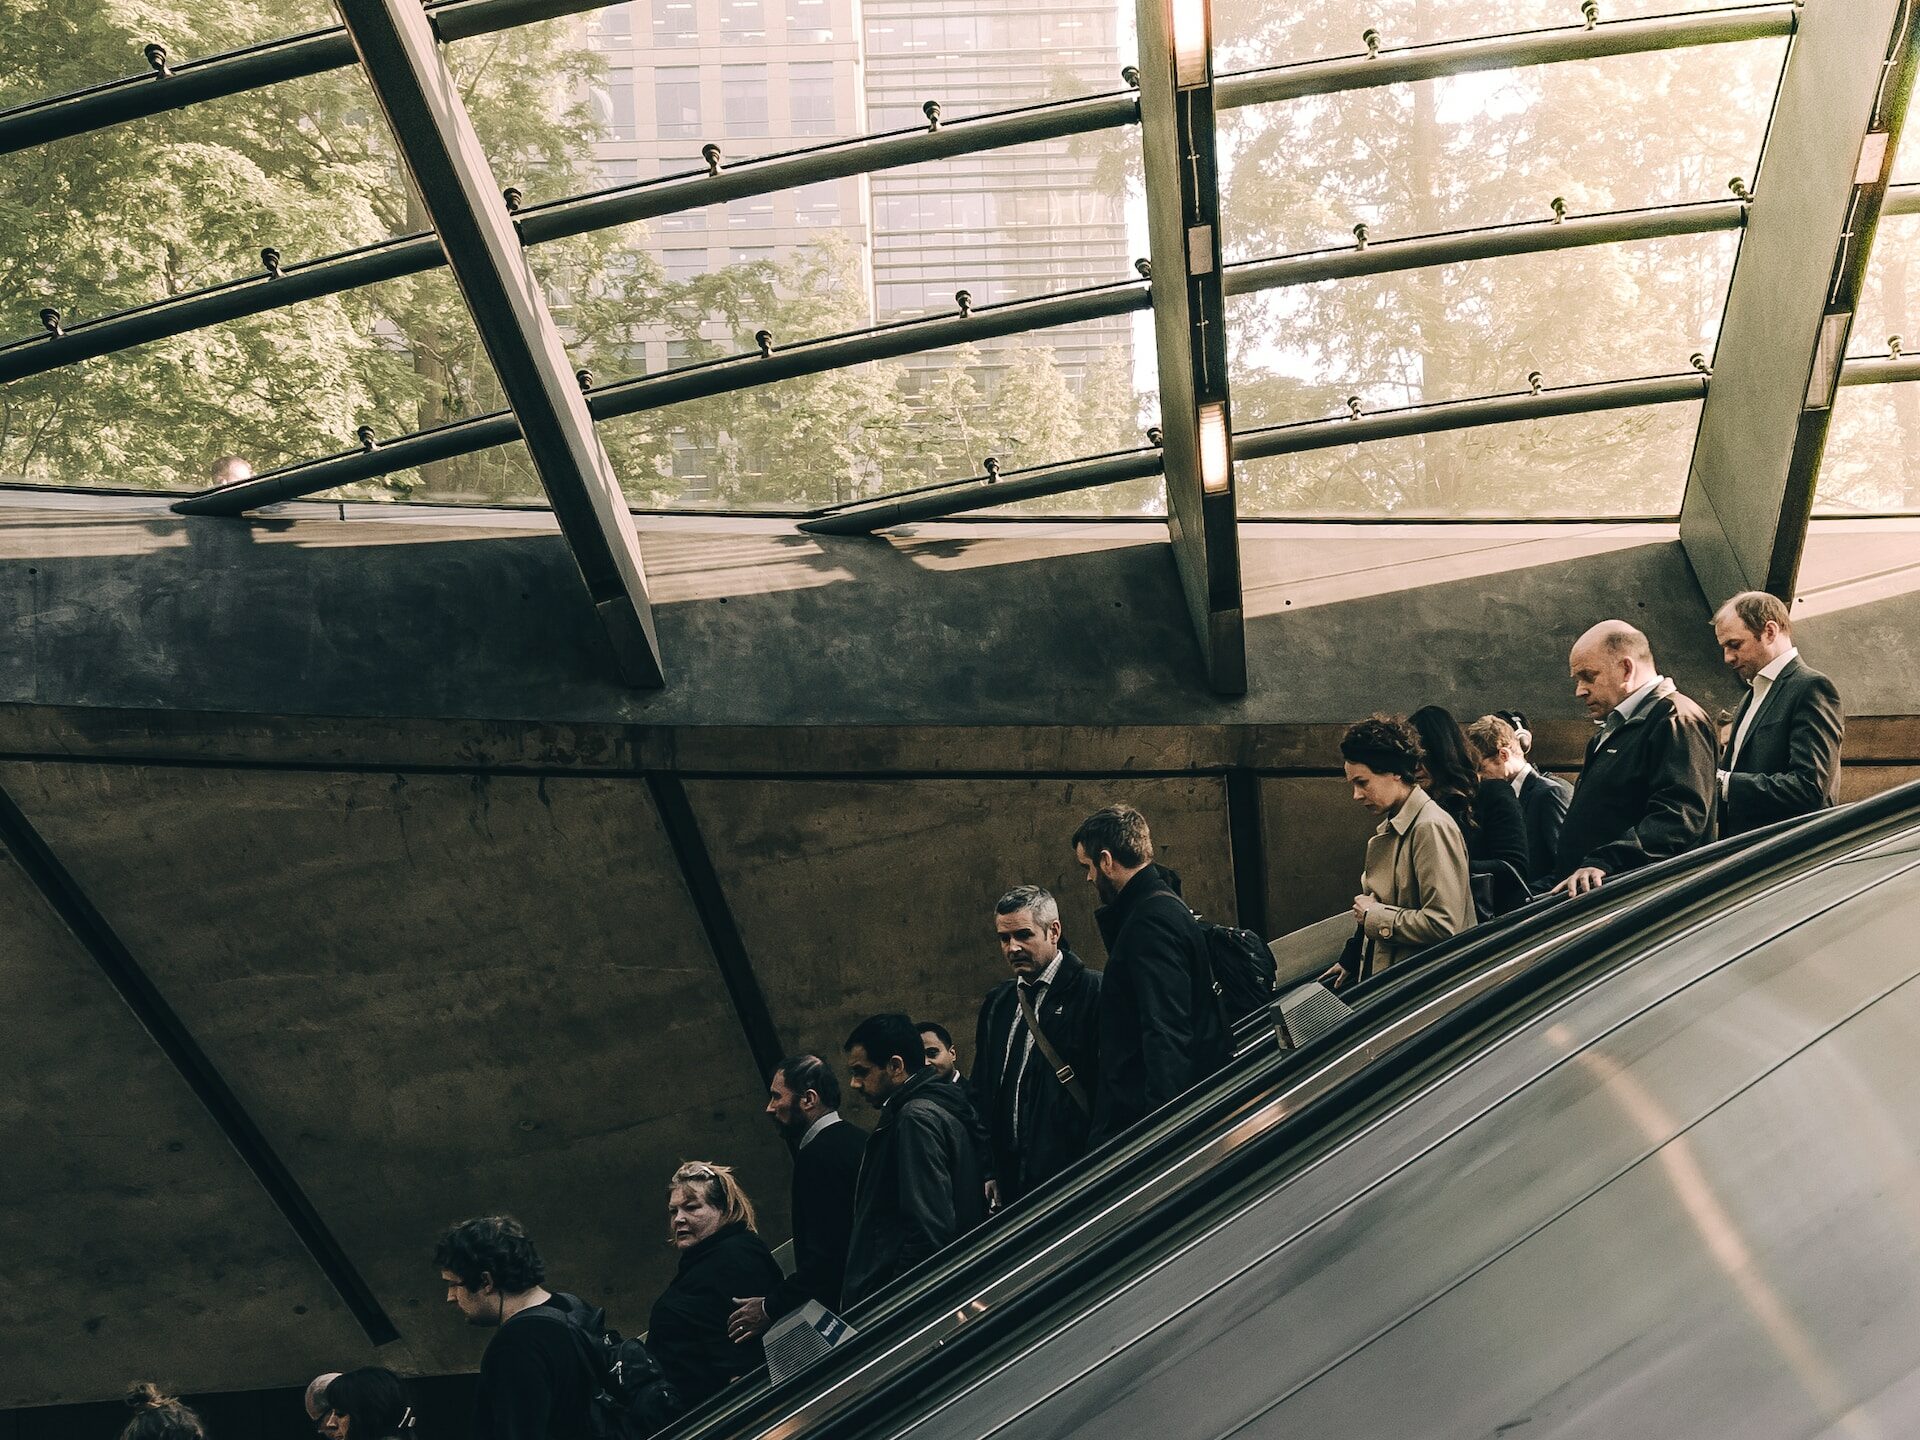 People standing on an escalator at Canary Wharf, London